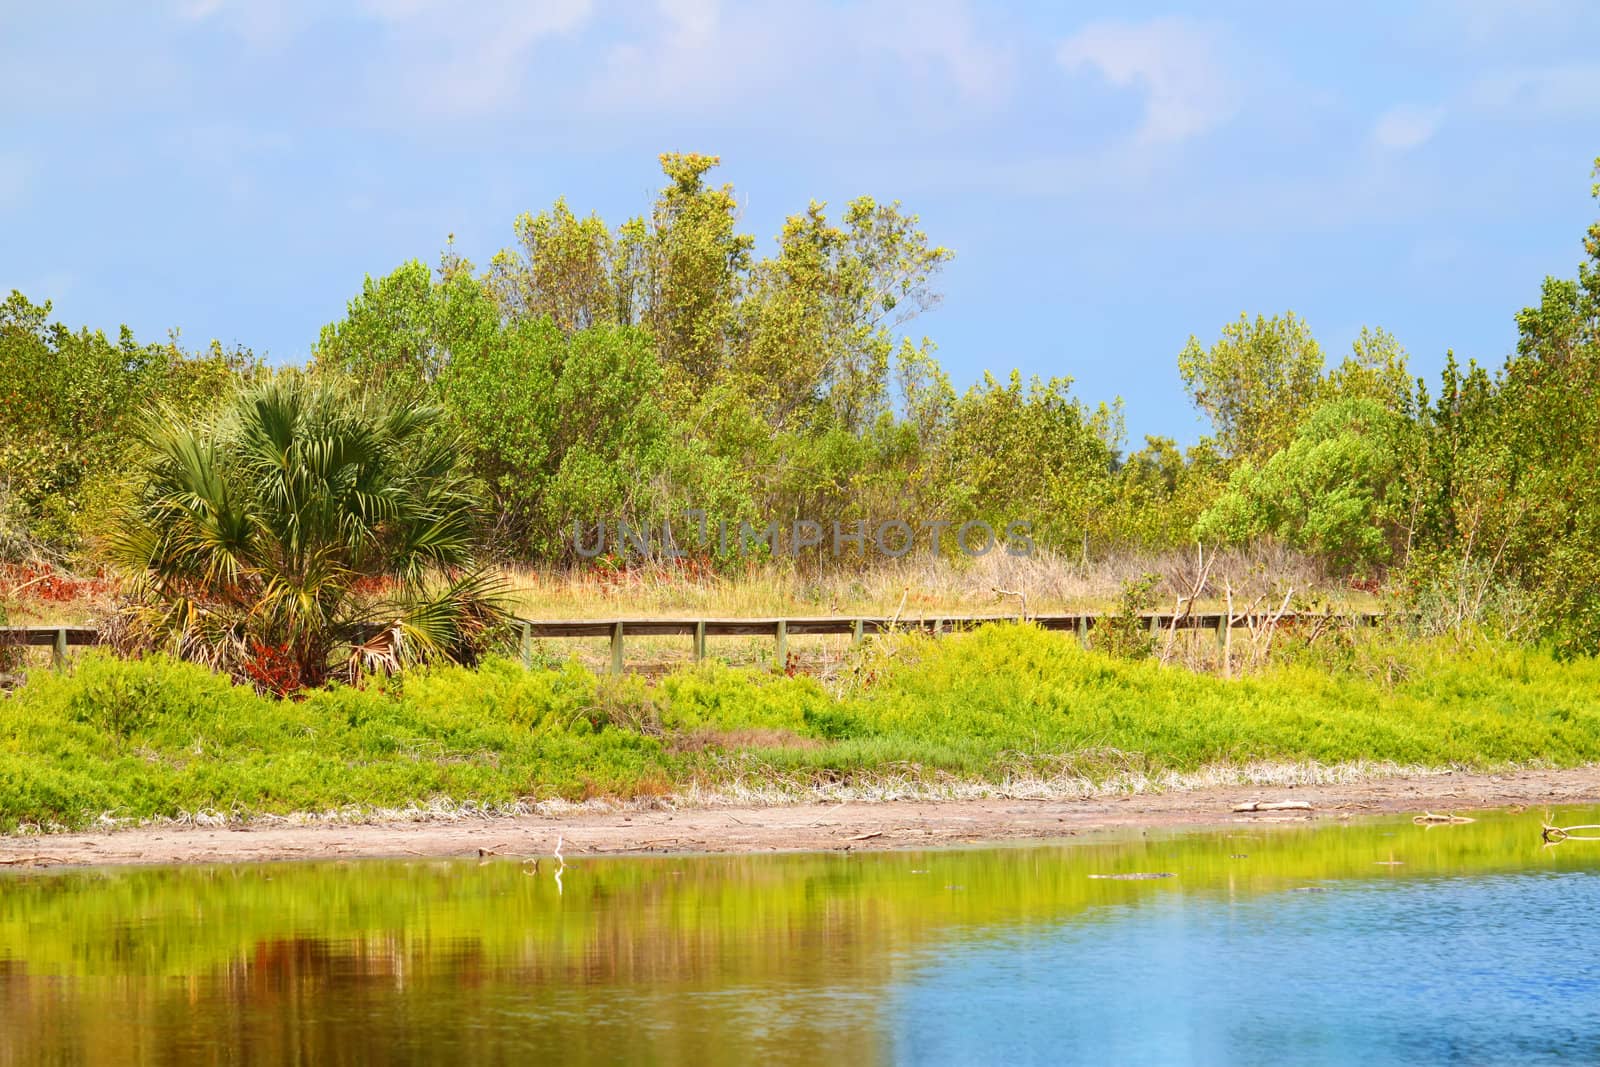 Beautiful sunny day at the Eco Pond of Everglades National Park in Florida.